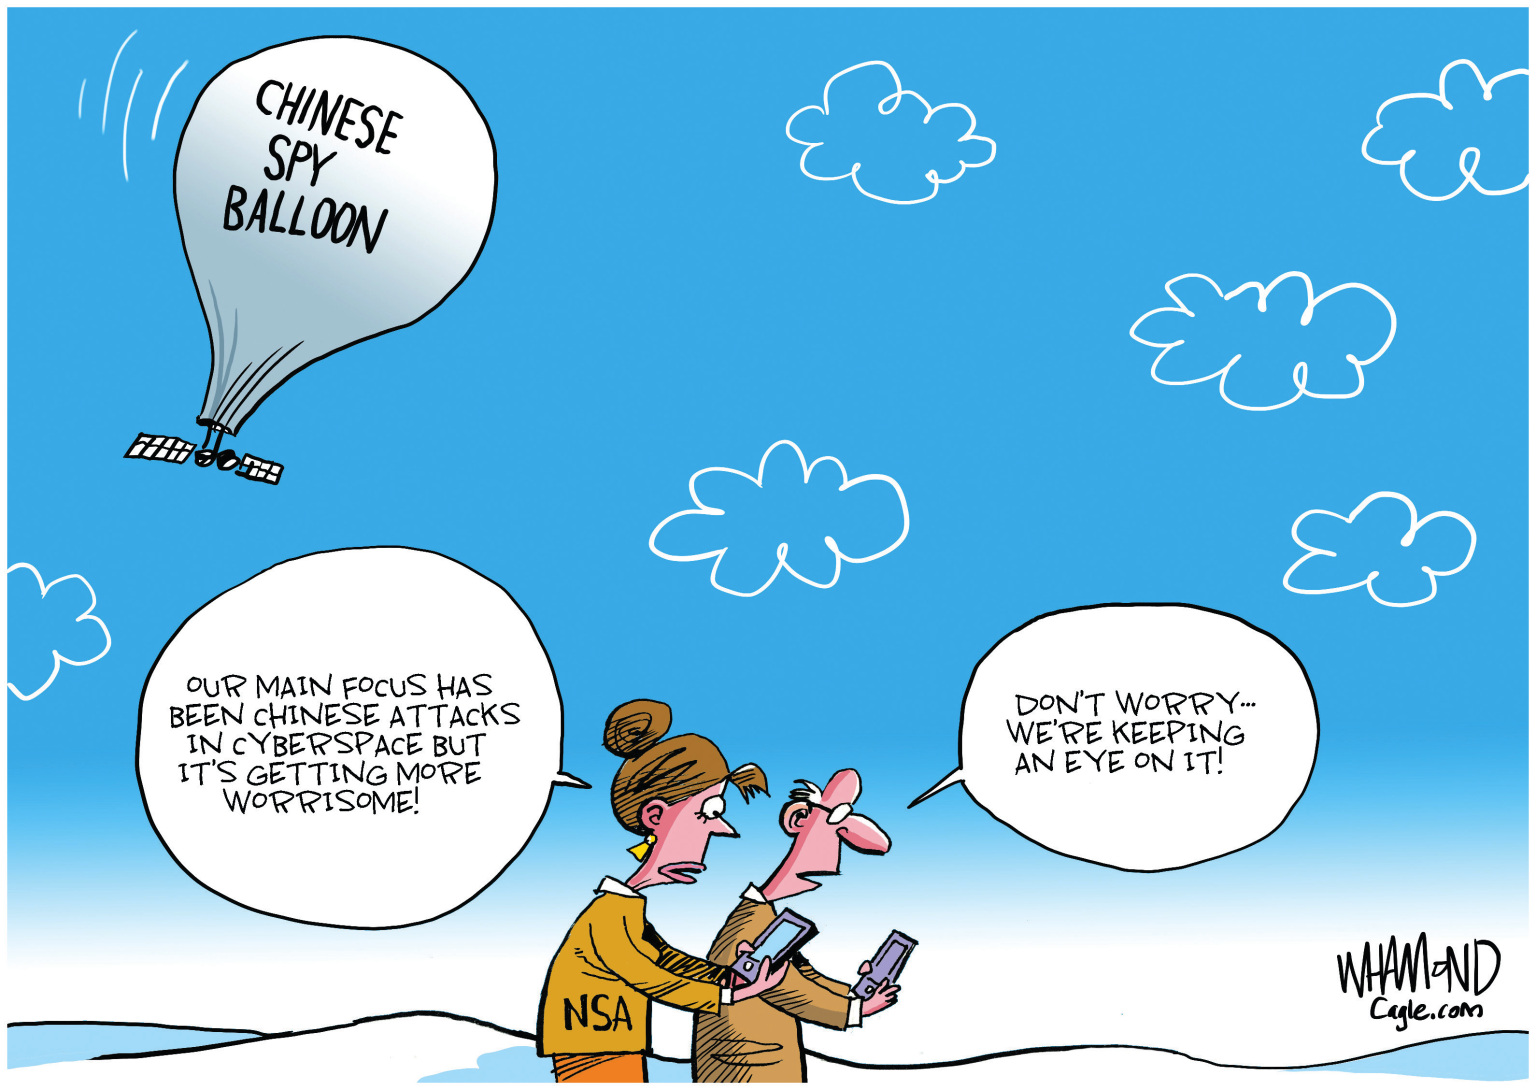 Editorial Cartoon: Chinese Spy Balloon - The Independent | News Events  Opinion More